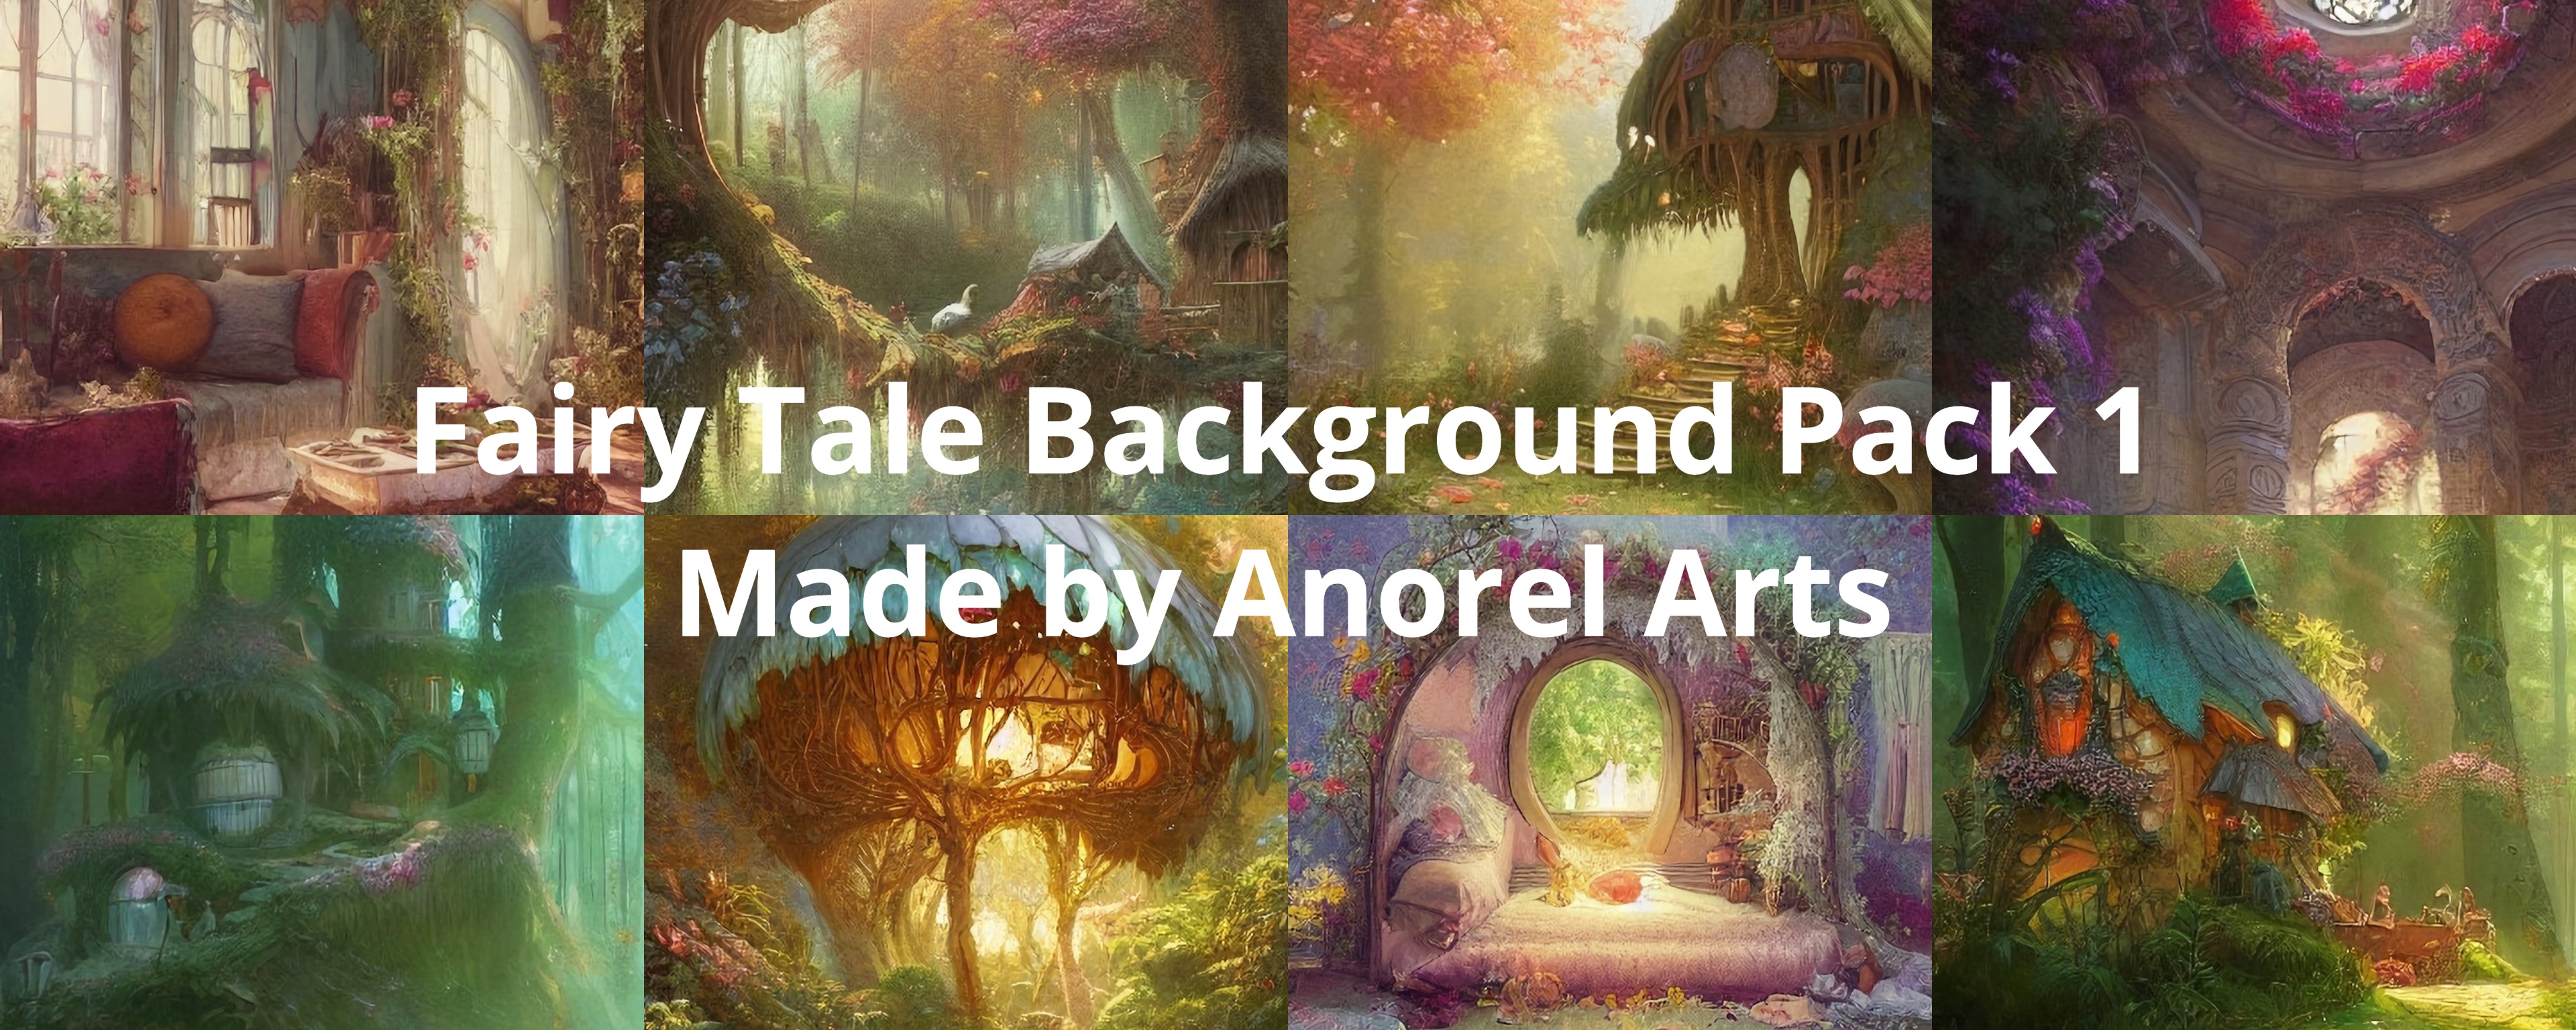 Fairy Tale Background Pack 1